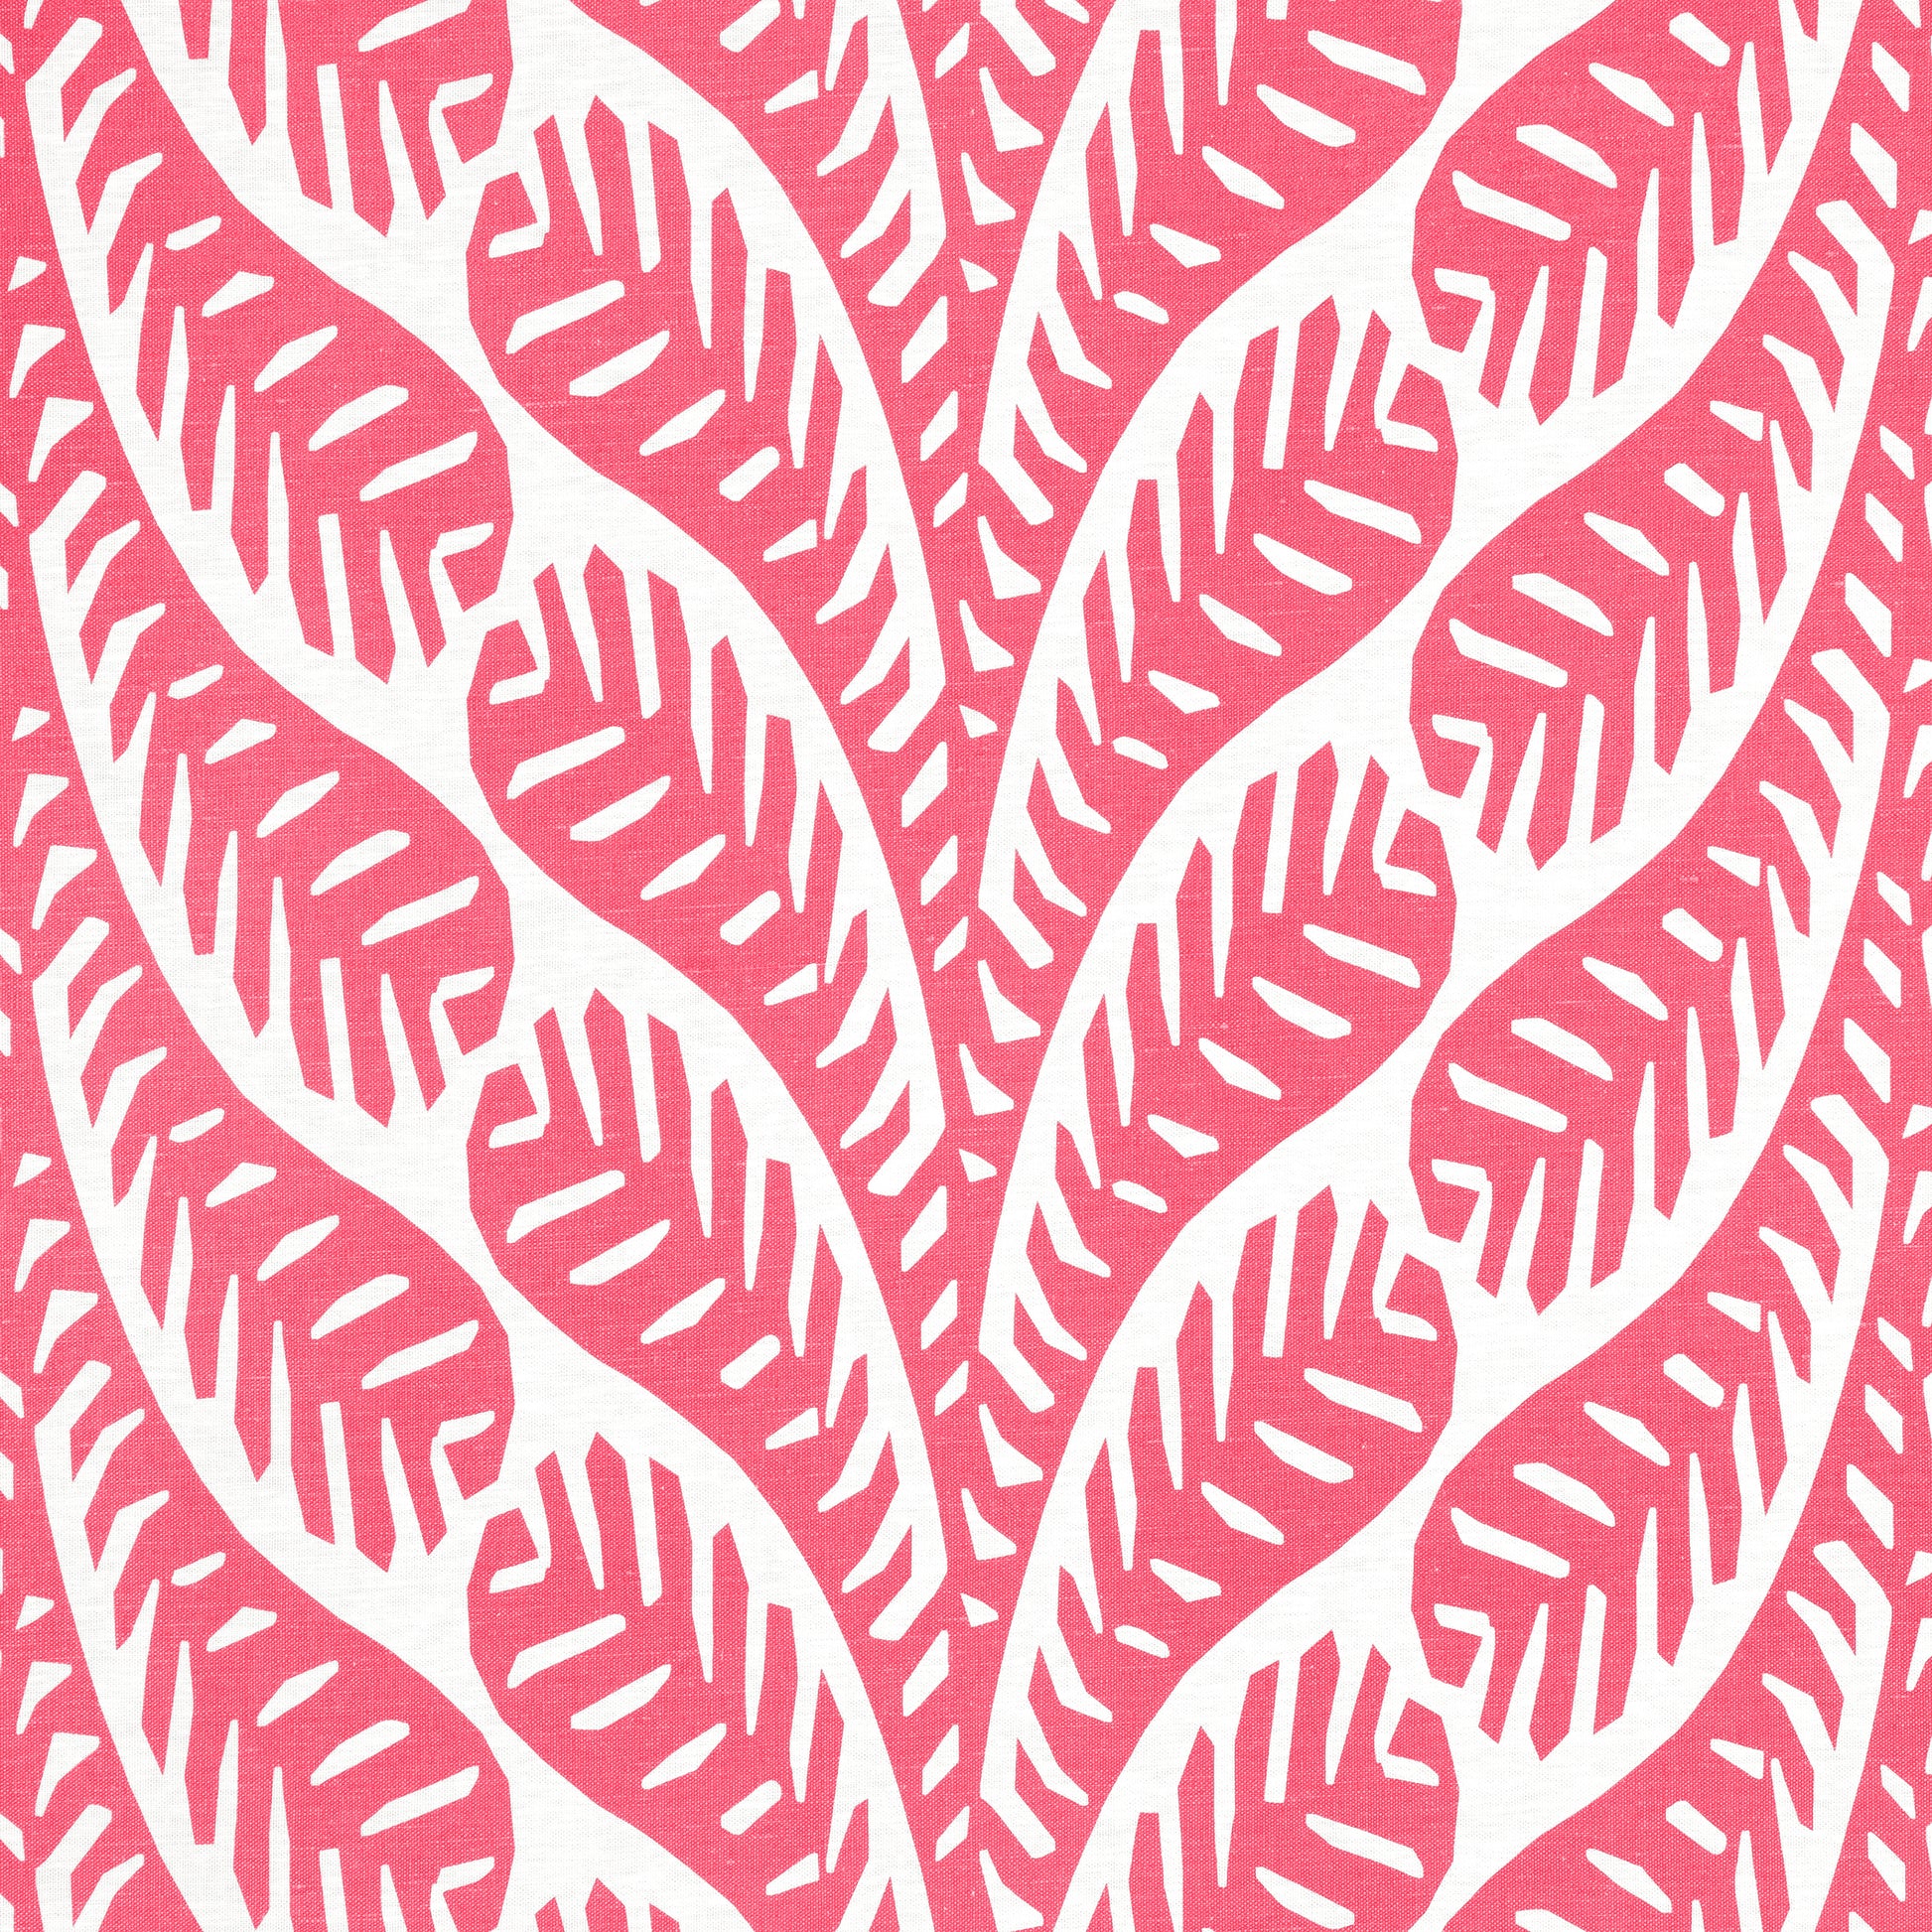 Purchase Thibaut Fabric Item# F920831 pattern name Ginger color Pink